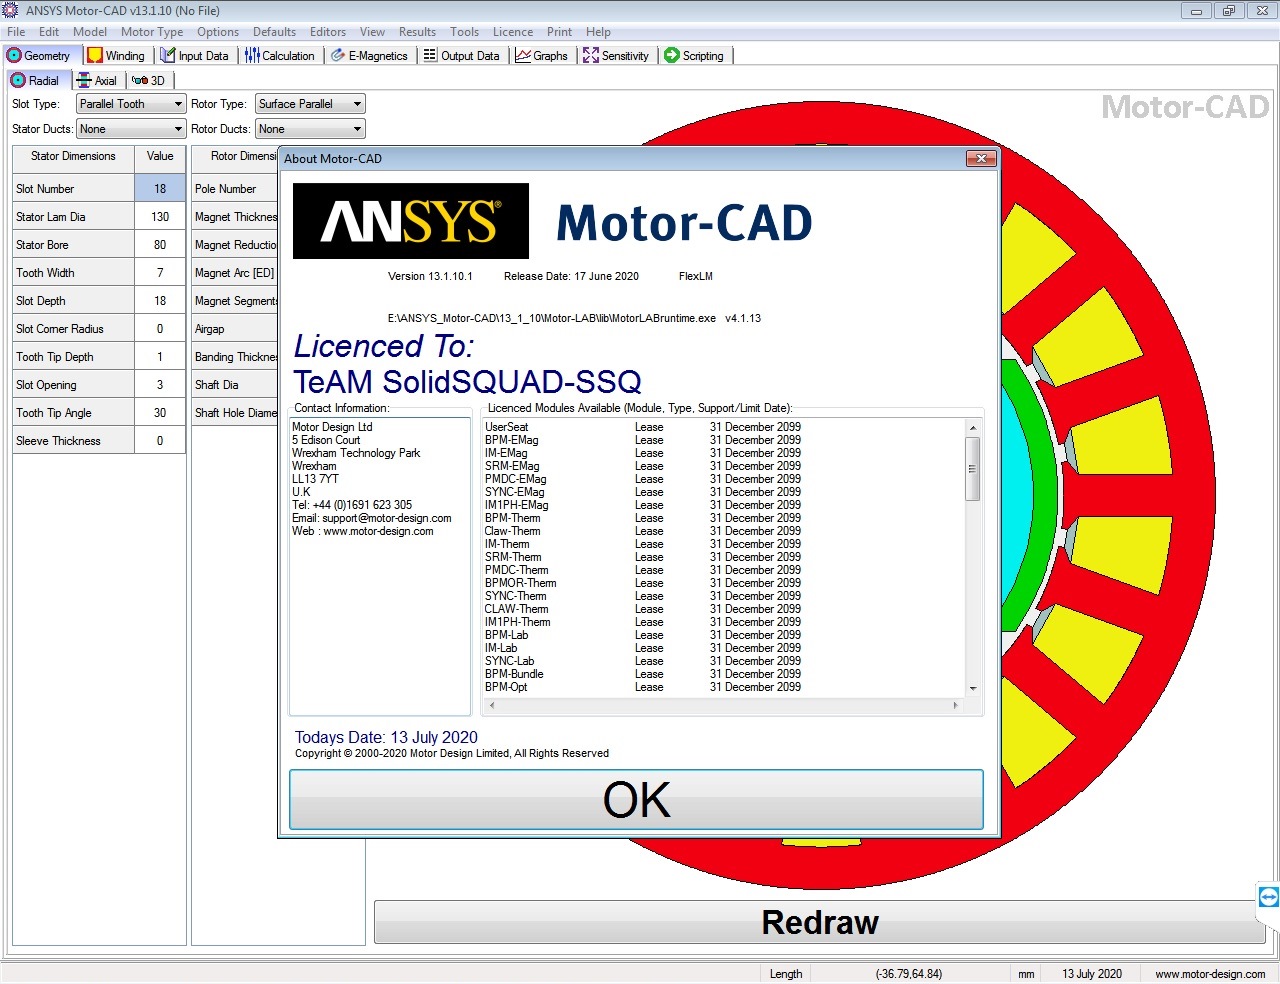 Working with ANSYS Motor-CAD v13.1.10 full license